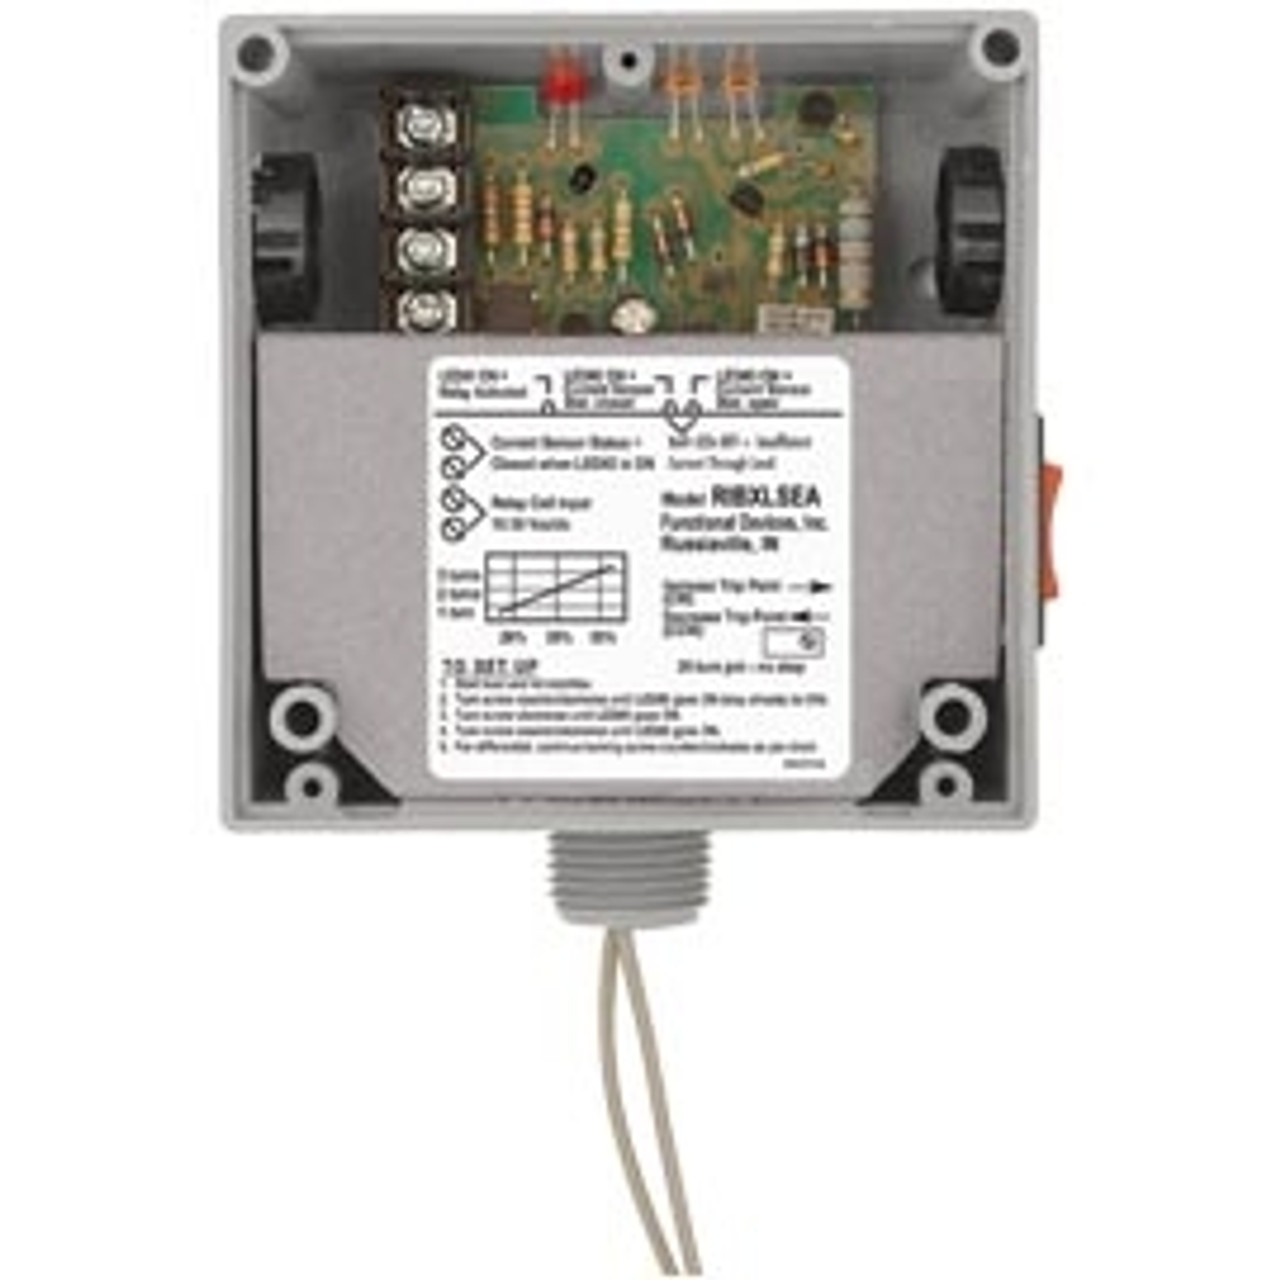 Functional Devices RIBXLSEA CURRENT SENSOR RELAY .125-5AMP